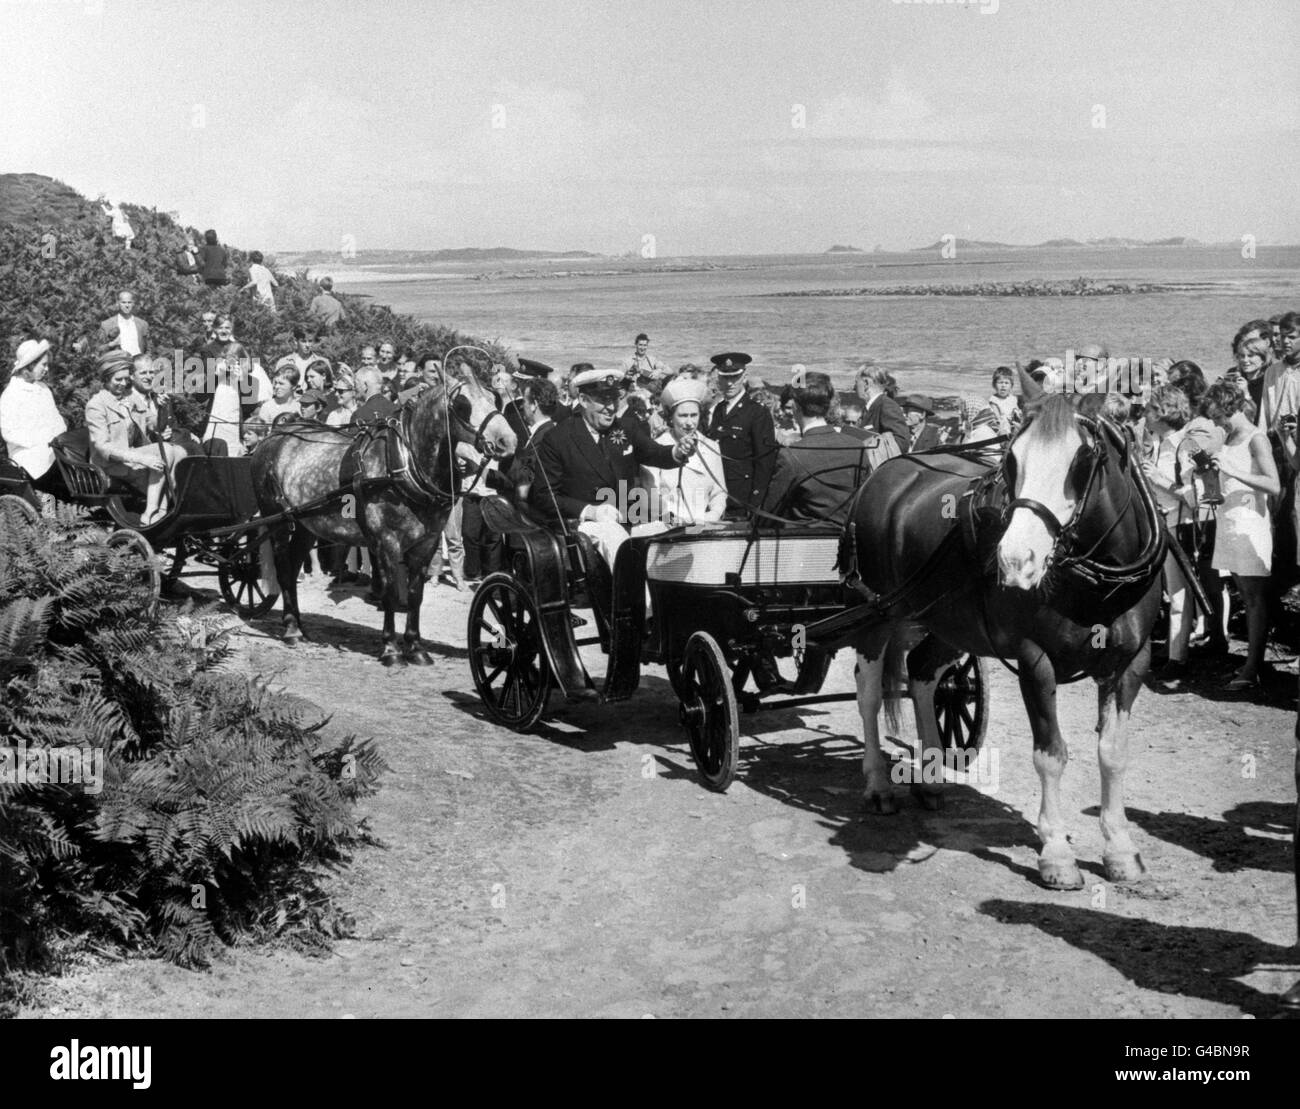 Queen Elizabeth II is seen at Tresco, Isles of Scilly, in a pony-trap with the Prince of Wales (back to pony in the first conveyance), with Commander Thomas Dorrien-Smith driving. In the second trap is Prince Philip, the Duke of Edinburgh, and Anne, Princess Royal, on the rear seat. Stock Photo